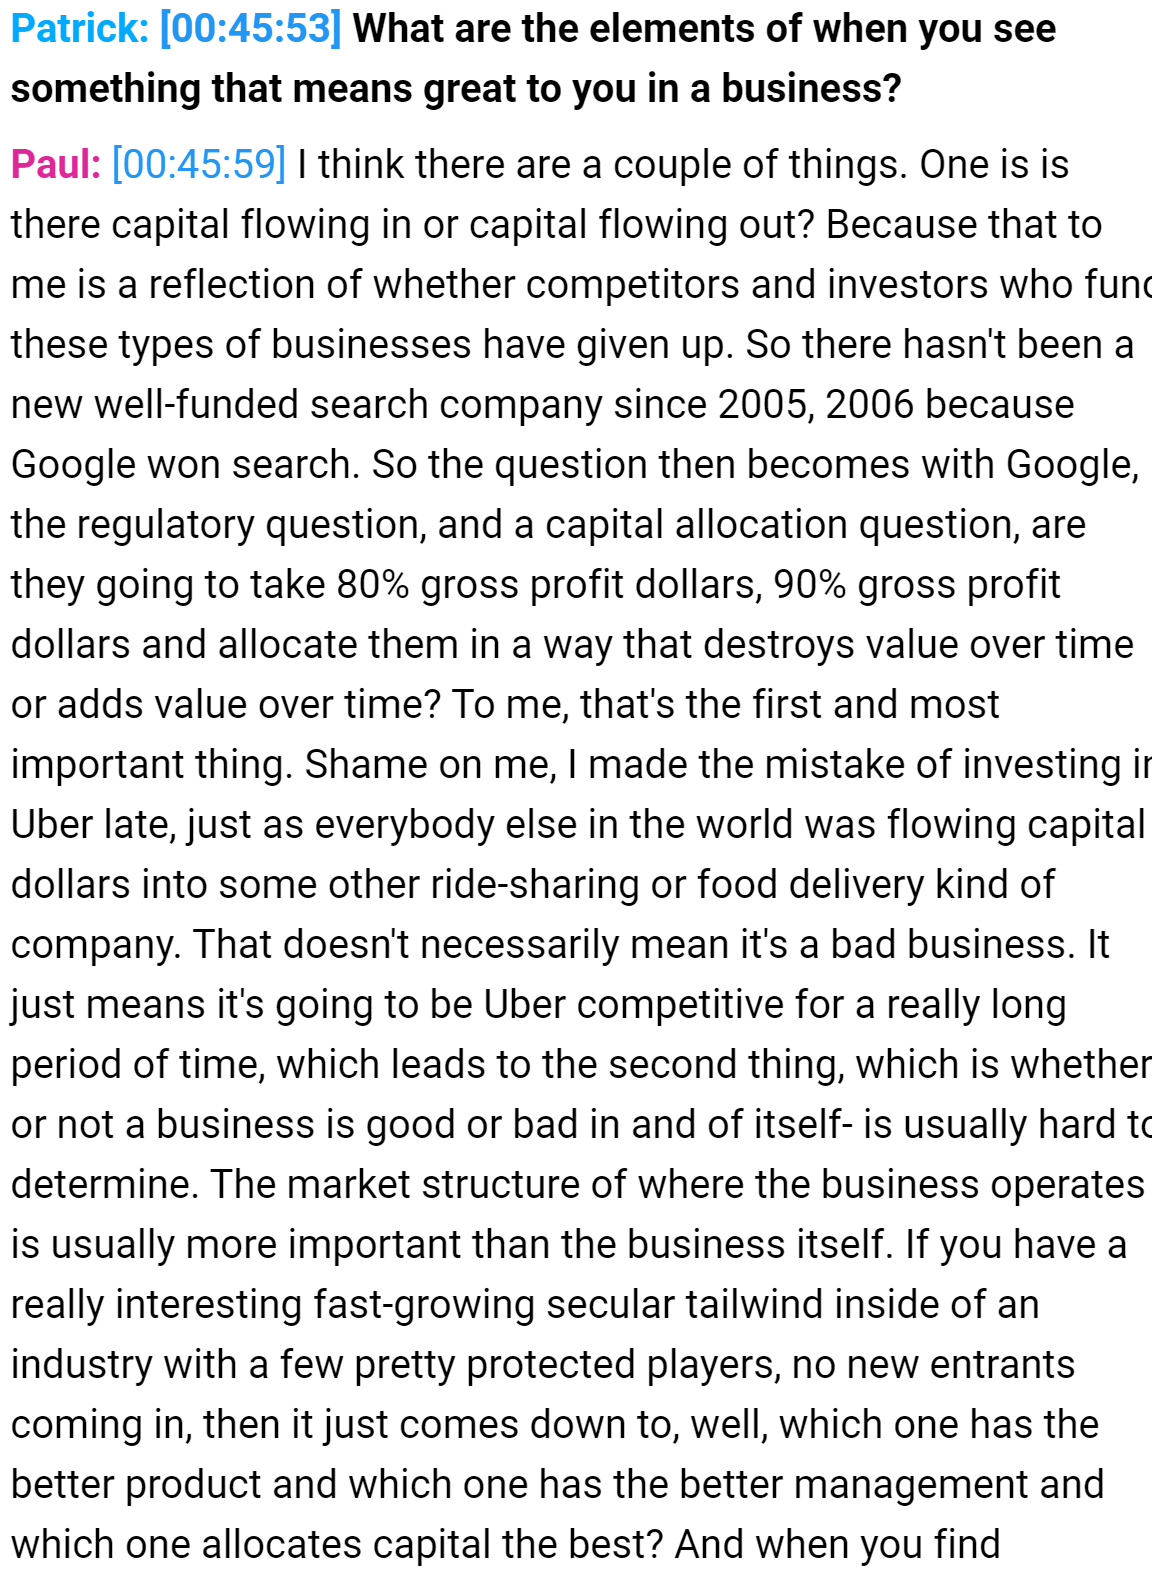 Patrick: 
What are the elements of when you see 
something that means great to you in a business? 
Paul: 
I think there are a couple of things. One is is 
there capital flowing in or capital flowing out? Because that to 
me is a reflection of whether competitors and investors who func 
these types of businesses have given up. So there hasn't been a 
new well-funded search company since 2005, 2006 because 
Google won search. So the question then becomes with Google, 
the regulatory question, and a capital allocation question, are 
they going to take 80% gross profit dollars, 90% gross profit 
dollars and allocate them in a way that destroys value over time 
or adds value over time? To me, that's the first and most 
important thing. Shame on me, I made the mistake of investing ir 
Uber late, just as everybody else in the world was flowing capital 
dollars into some other ride-sharing or food delivery kind of 
company. That doesn't necessarily mean it's a bad business. It 
just means it's going to be Uber competitive for a really long 
period of time, which leads to the second thing, which is whether 
or not a business is good or bad in and of itself- is usually hard tc 
determine. The market structure of where the business operates 
is usually more important than the business itself. If you have a 
really interesting fast-growing secular tailwind inside of an 
industry with a few pretty protected players, no new entrants 
coming in, then it just comes down to, well, which one has the 
better product and which one has the better management and 
which one allocates capital the best? And when you find 